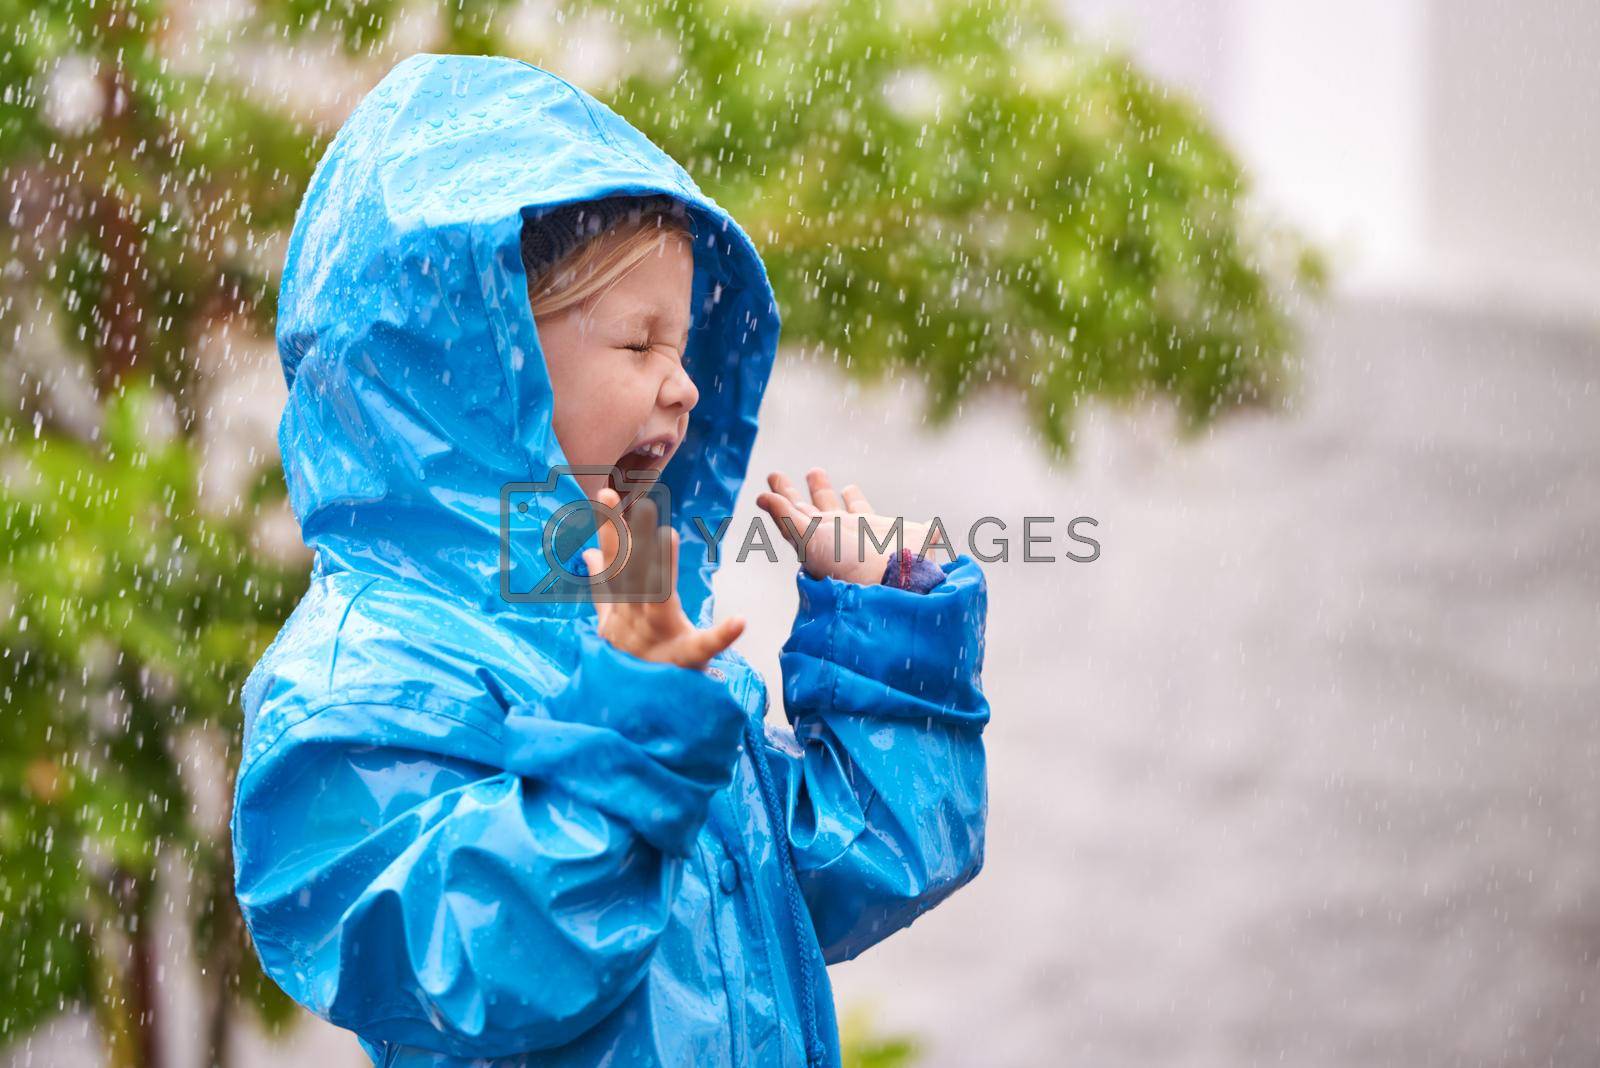 Royalty free image of To enjoy the rainbow, first enjoy the rain. a young girl playing outside in the rain. by YuriArcurs